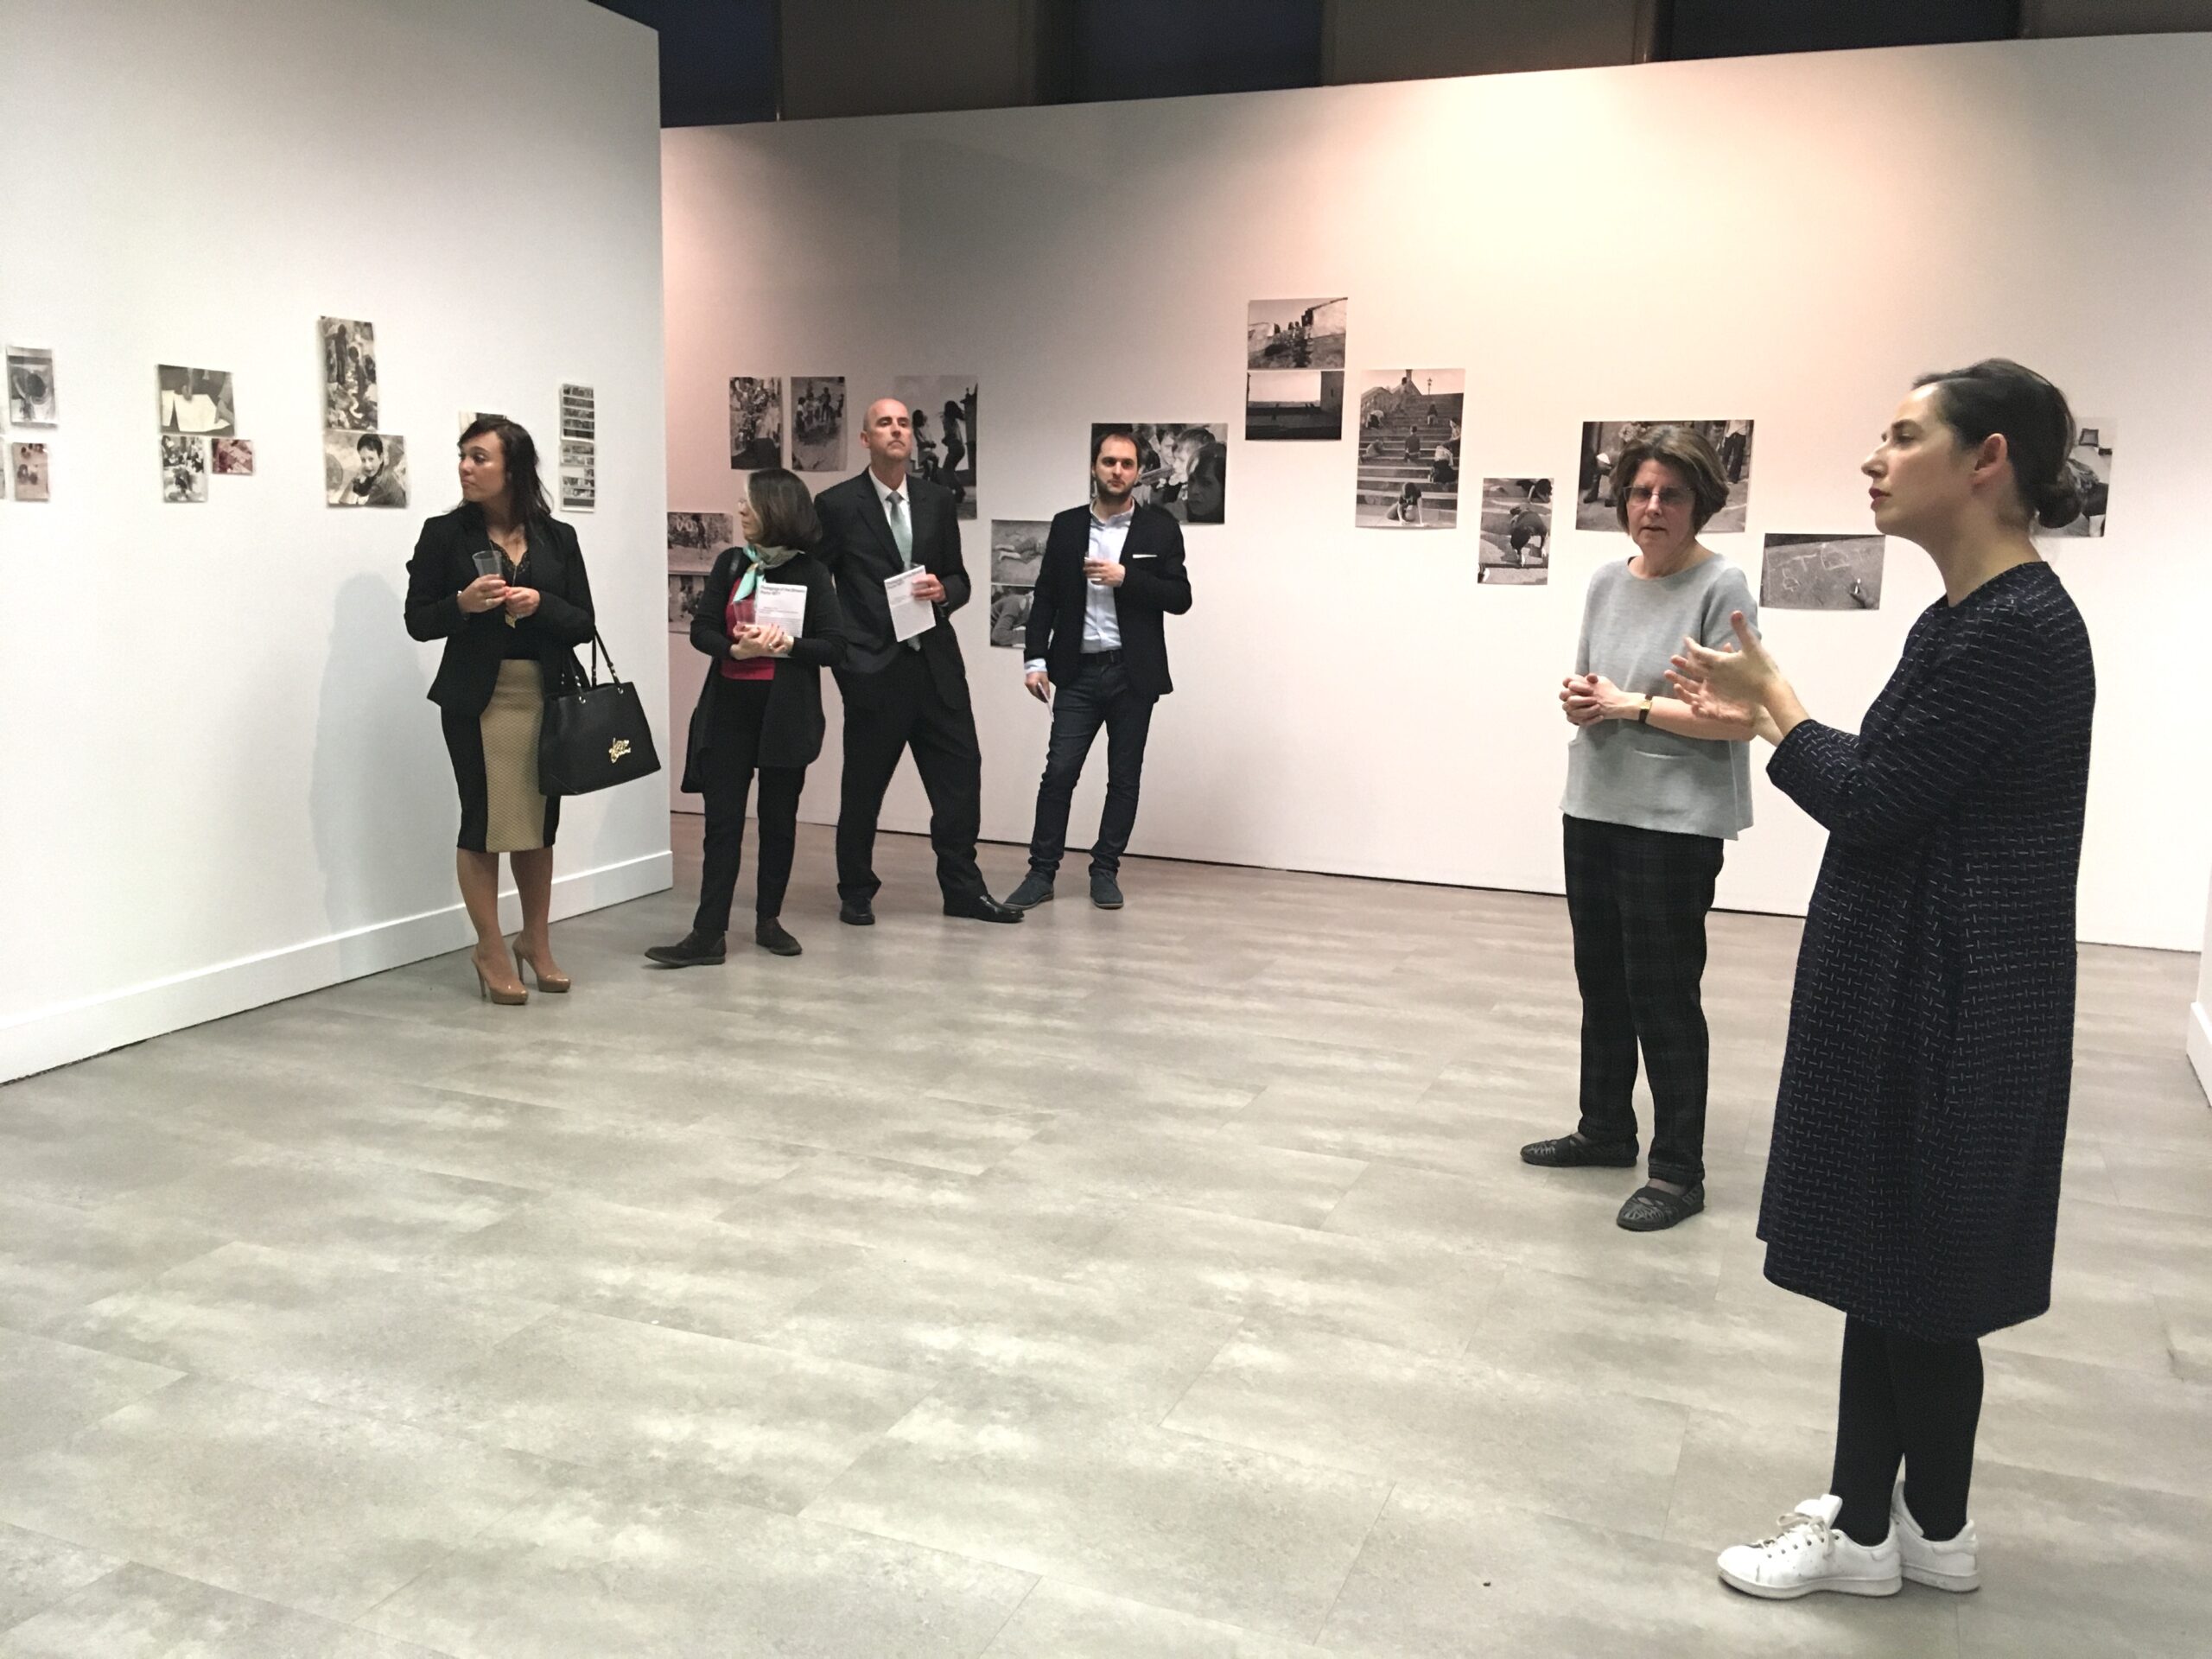 Cocktail reception presenting “Pedagogy of the Streets: Porto 1977” – some photos